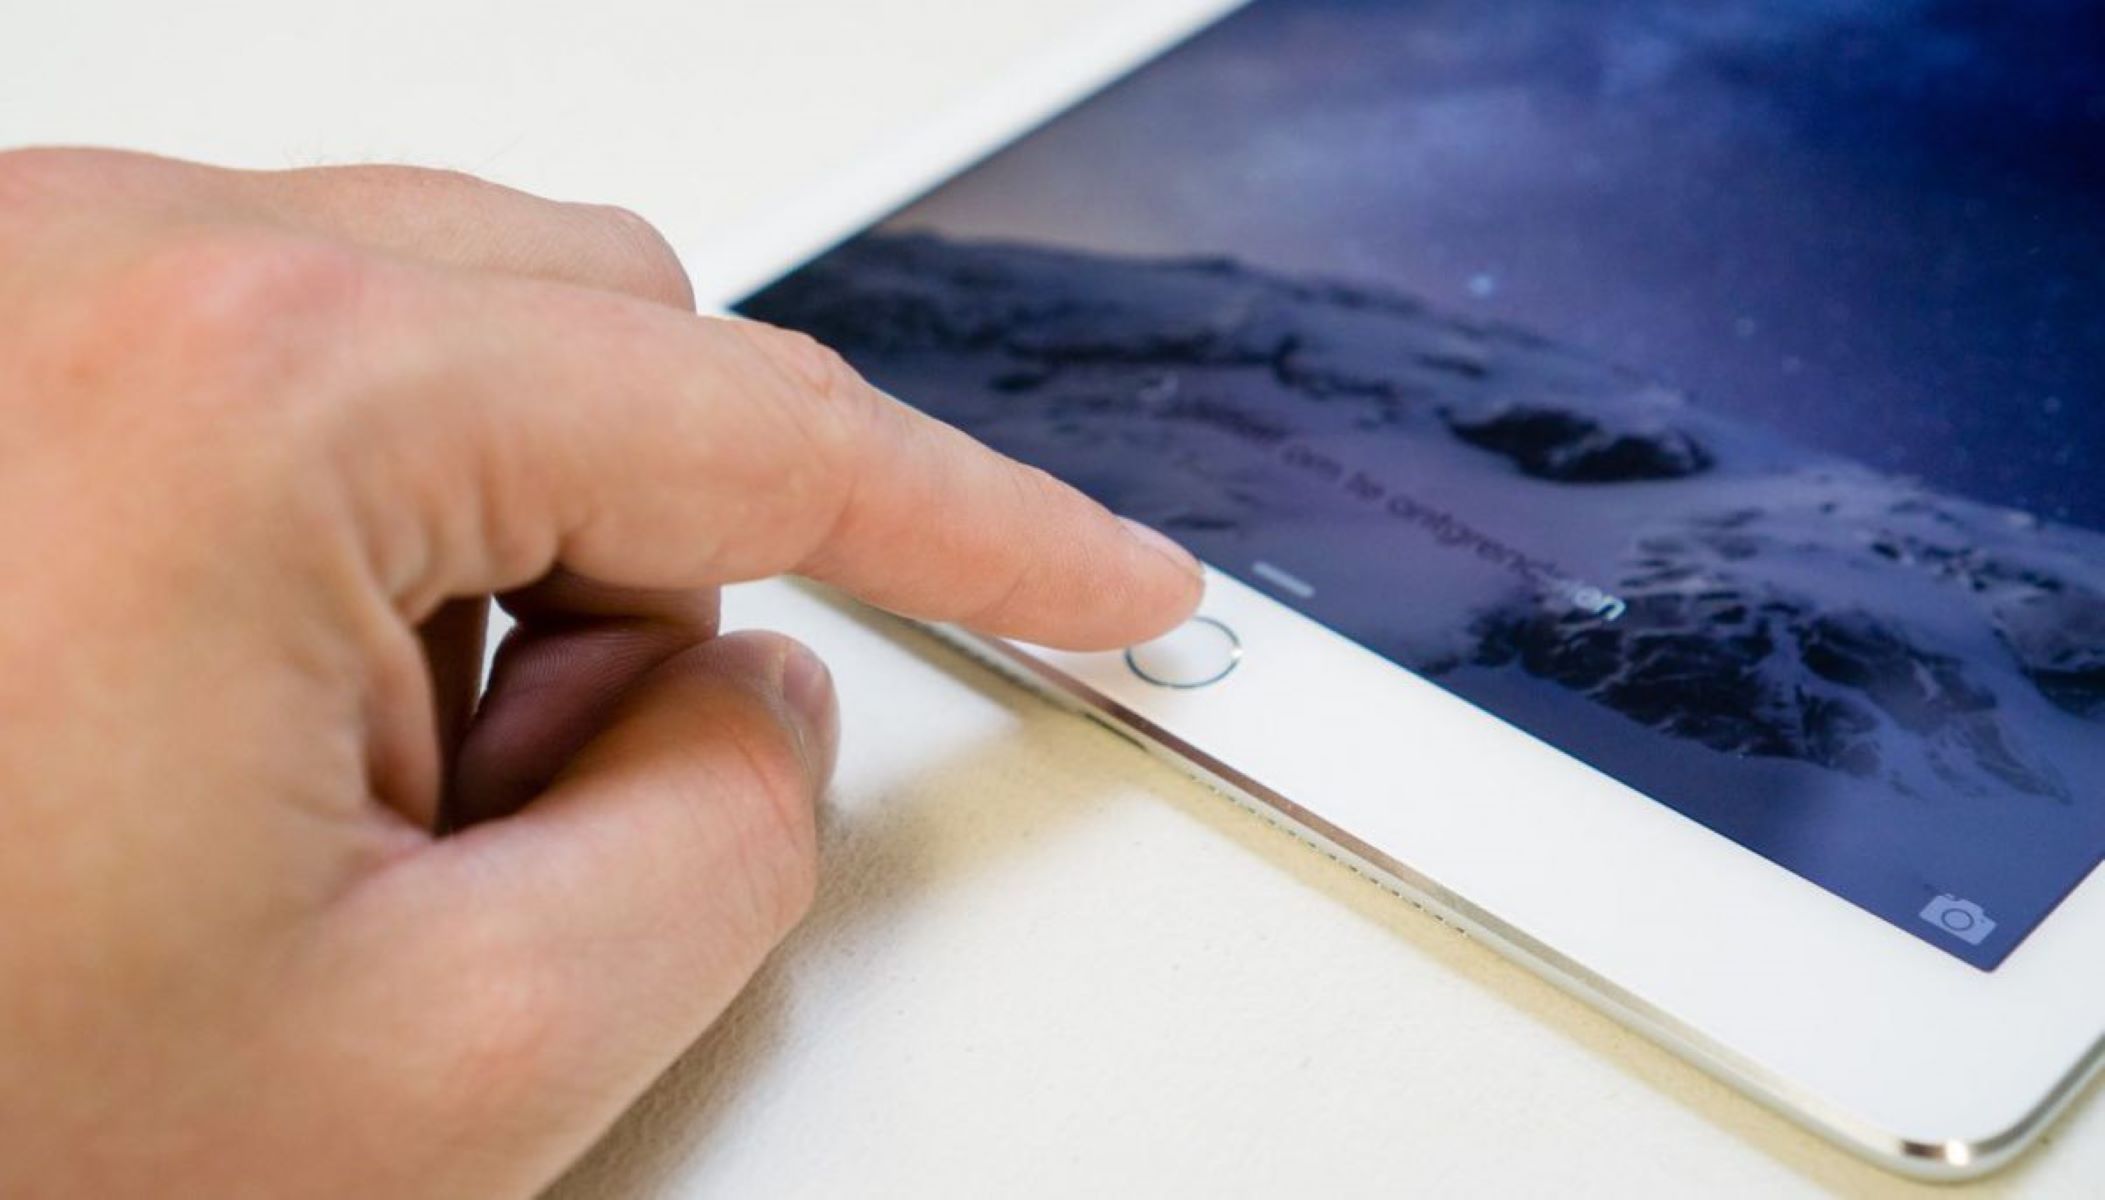 How To Fix An IPad’s Home Button Not Working